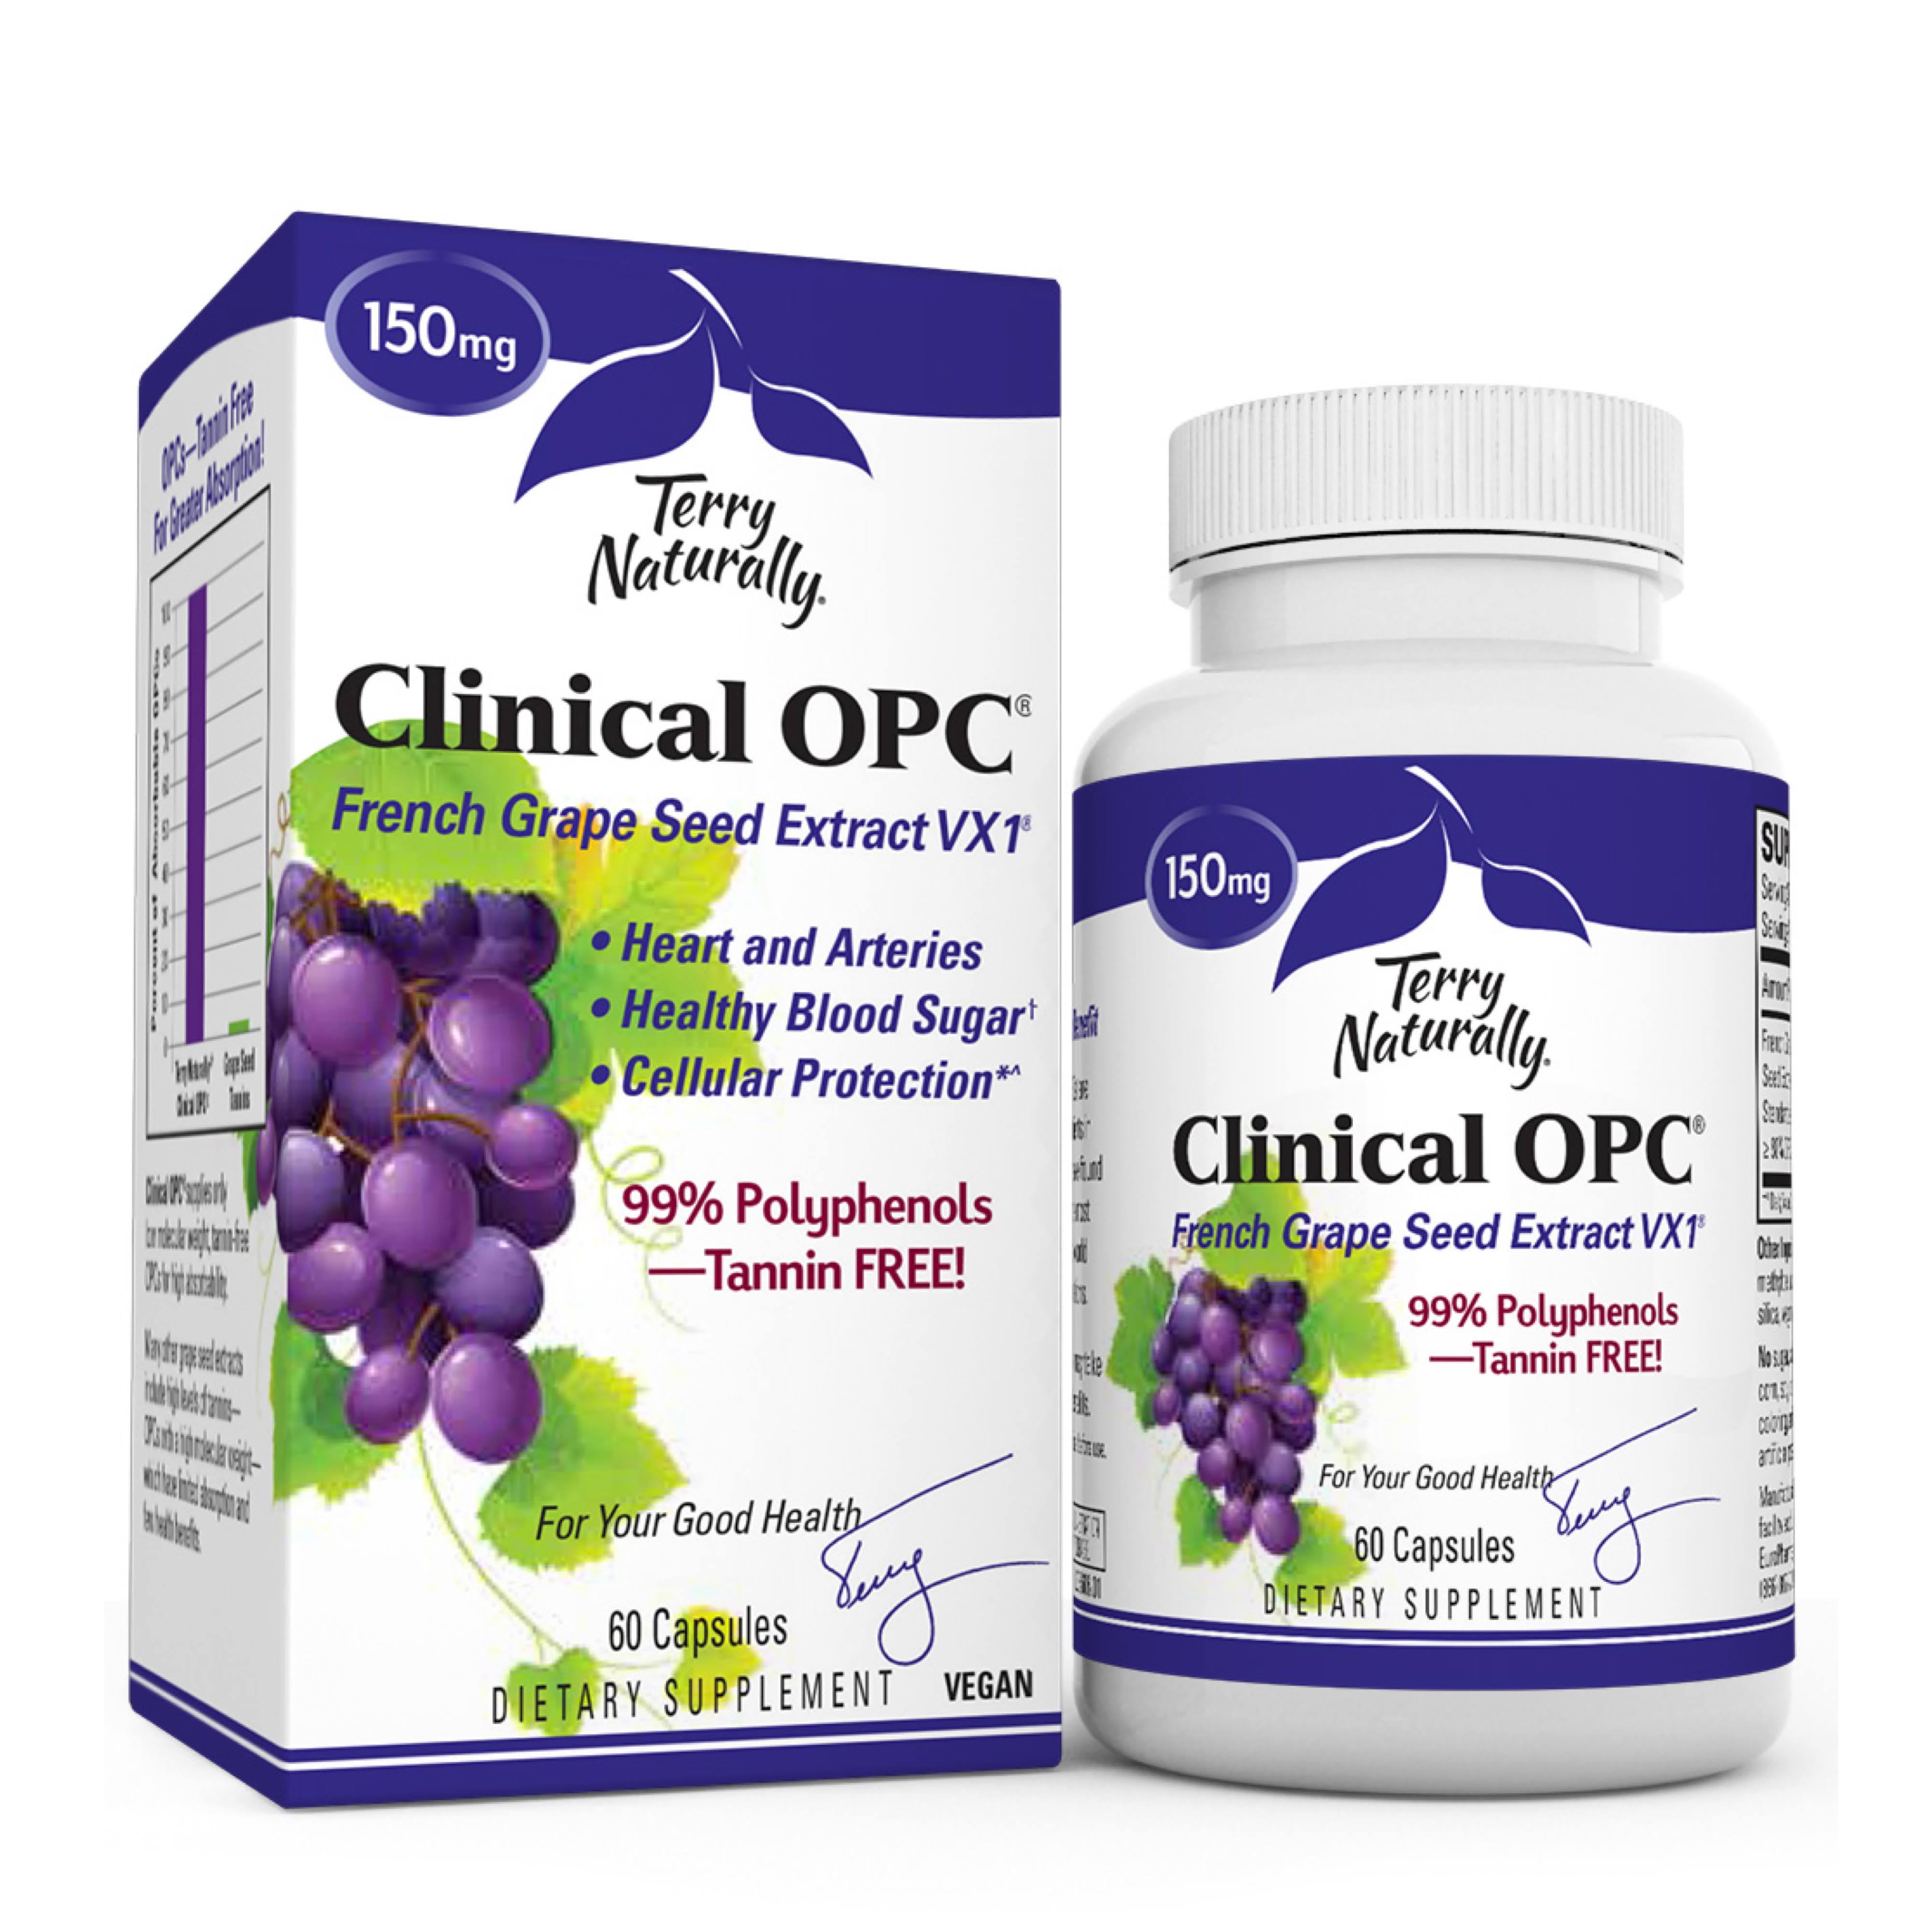 Terry Naturally Clinical OPC Dietary Supplement - 60 Capsules